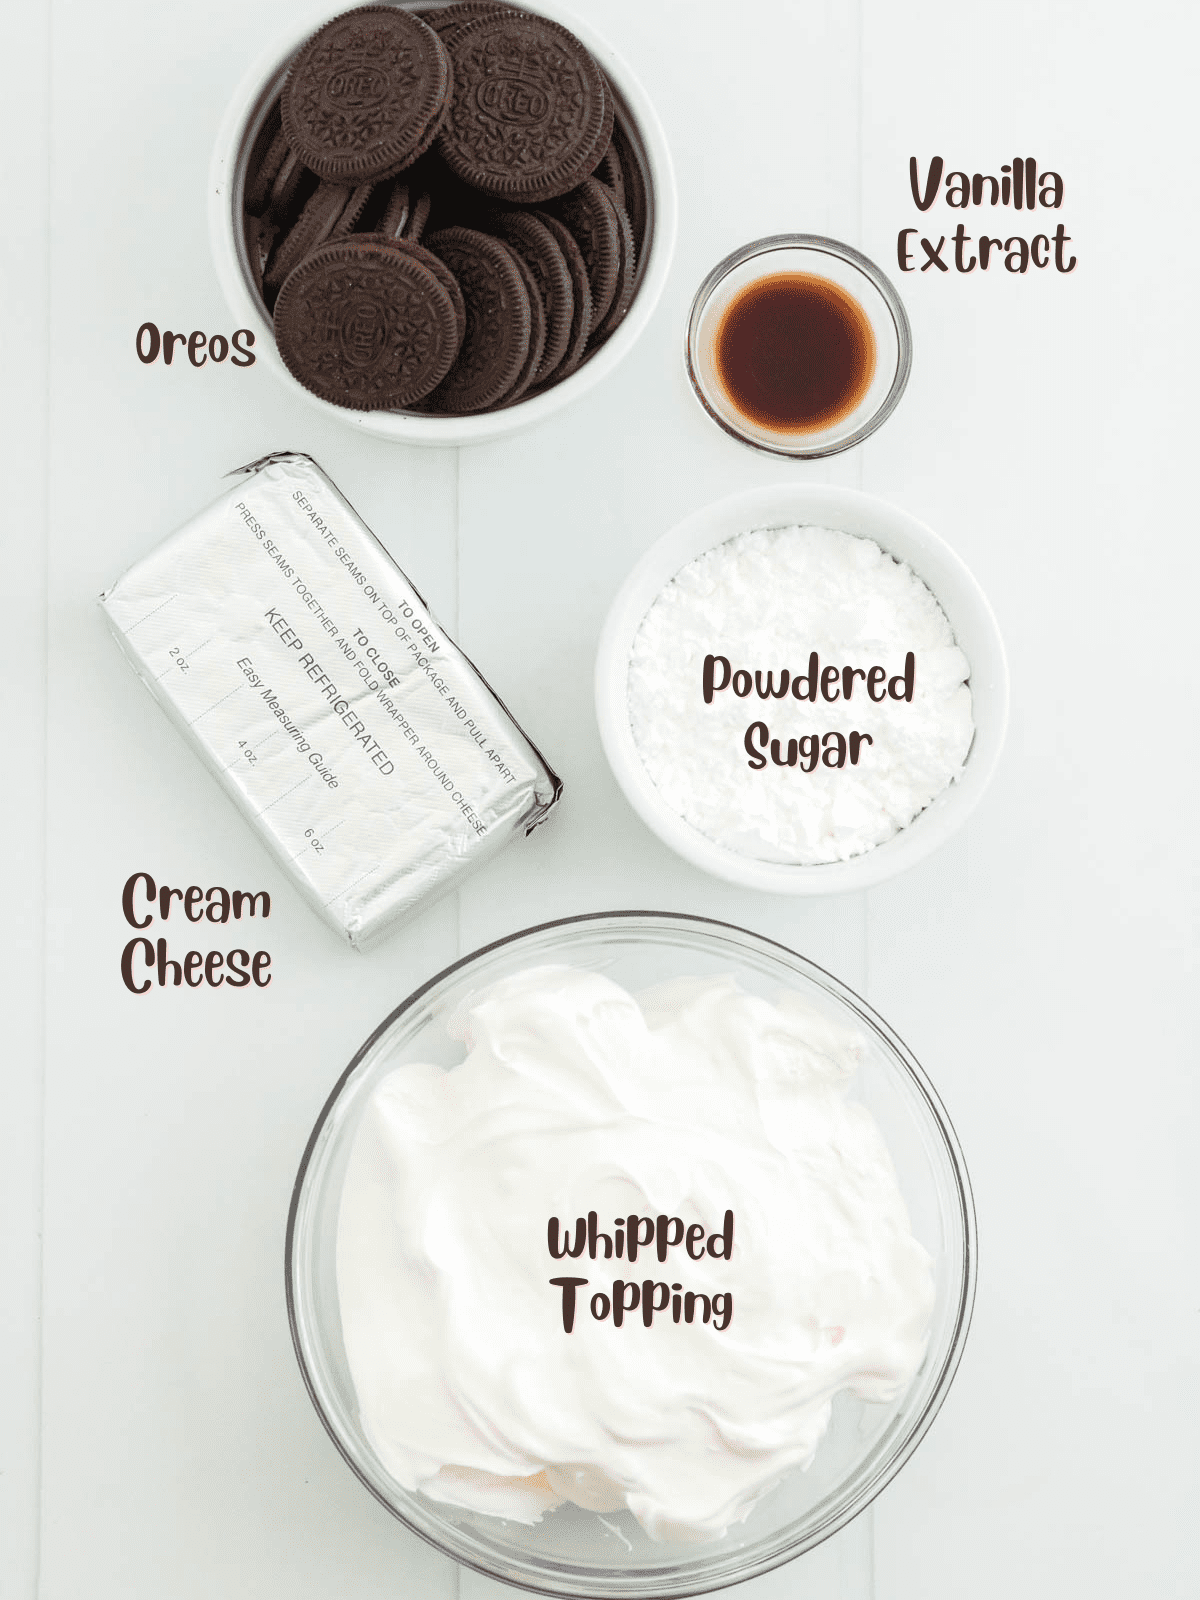 Ingredients for Oreo dip set out on a counter with labels on the image.